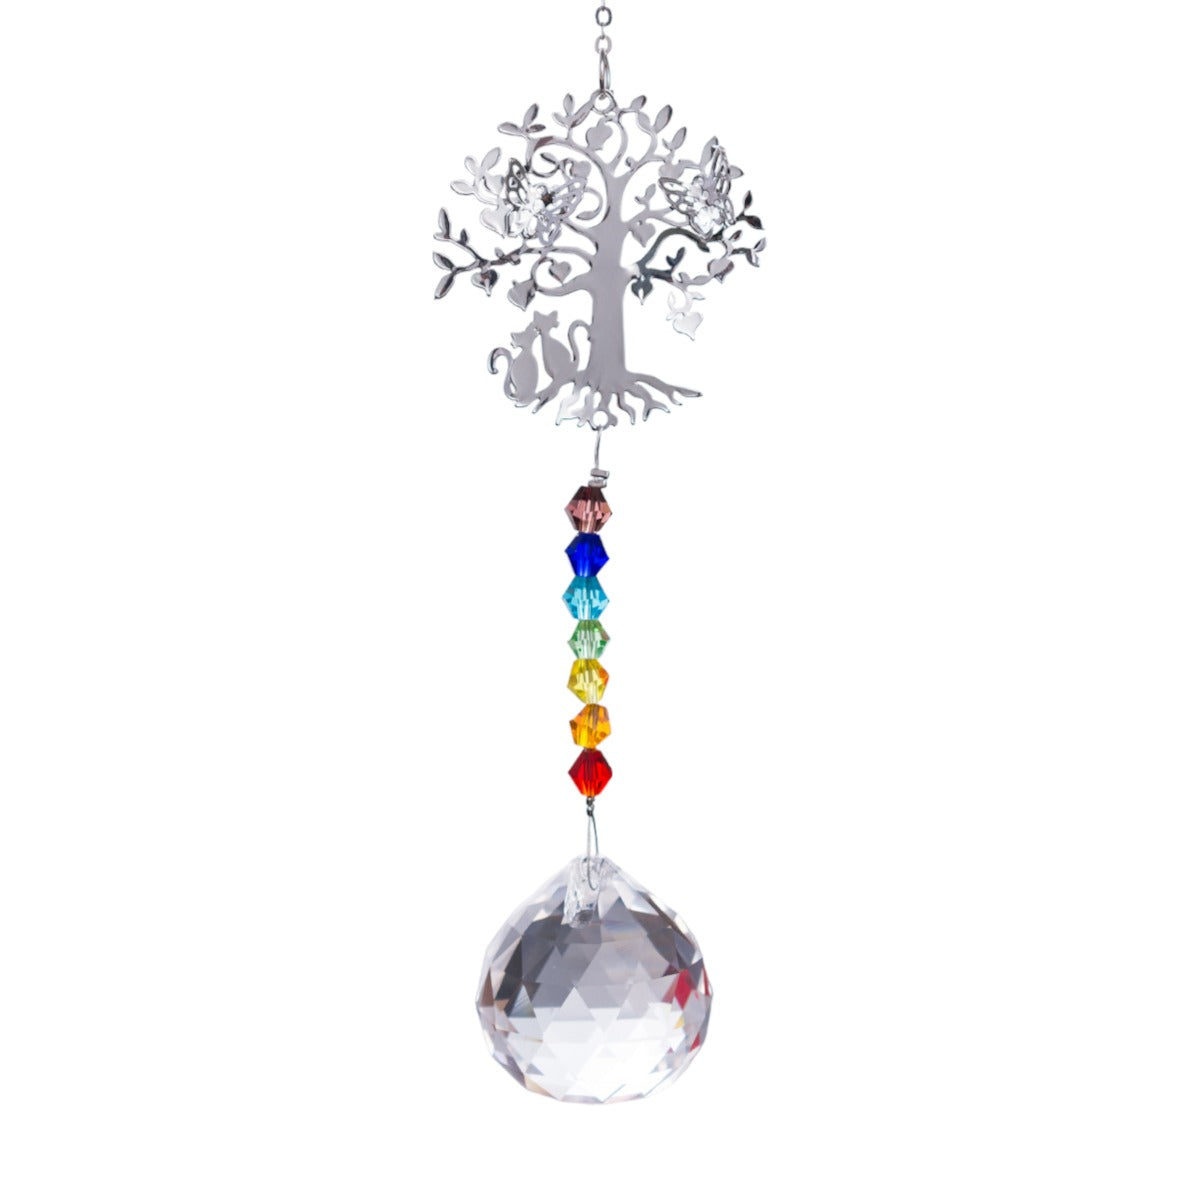 K9 Crystal Hanger Chakra w Tree and Butterflies Style 5 - 13 inch - NEW523